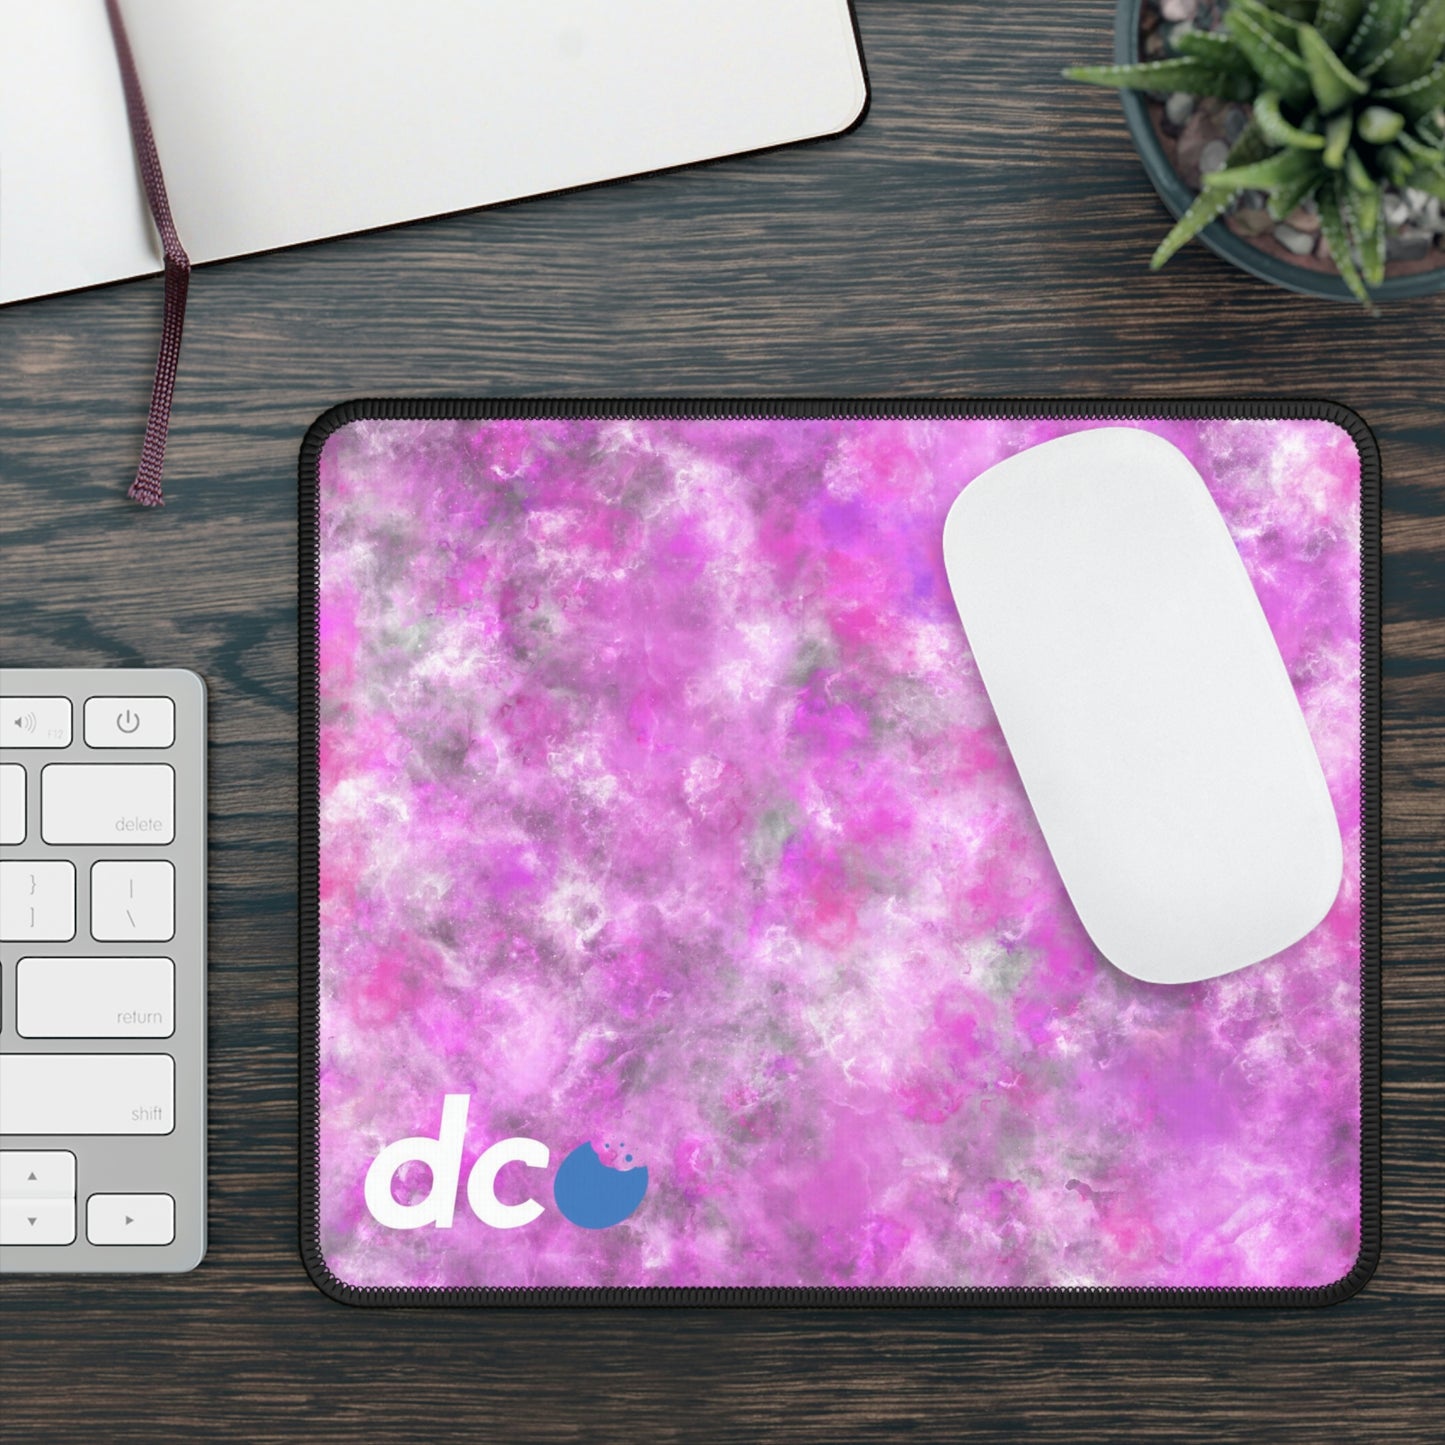 A gaming mouse pad with a fluffy mix of pink, white, and gray. A mouse sits on top of it.